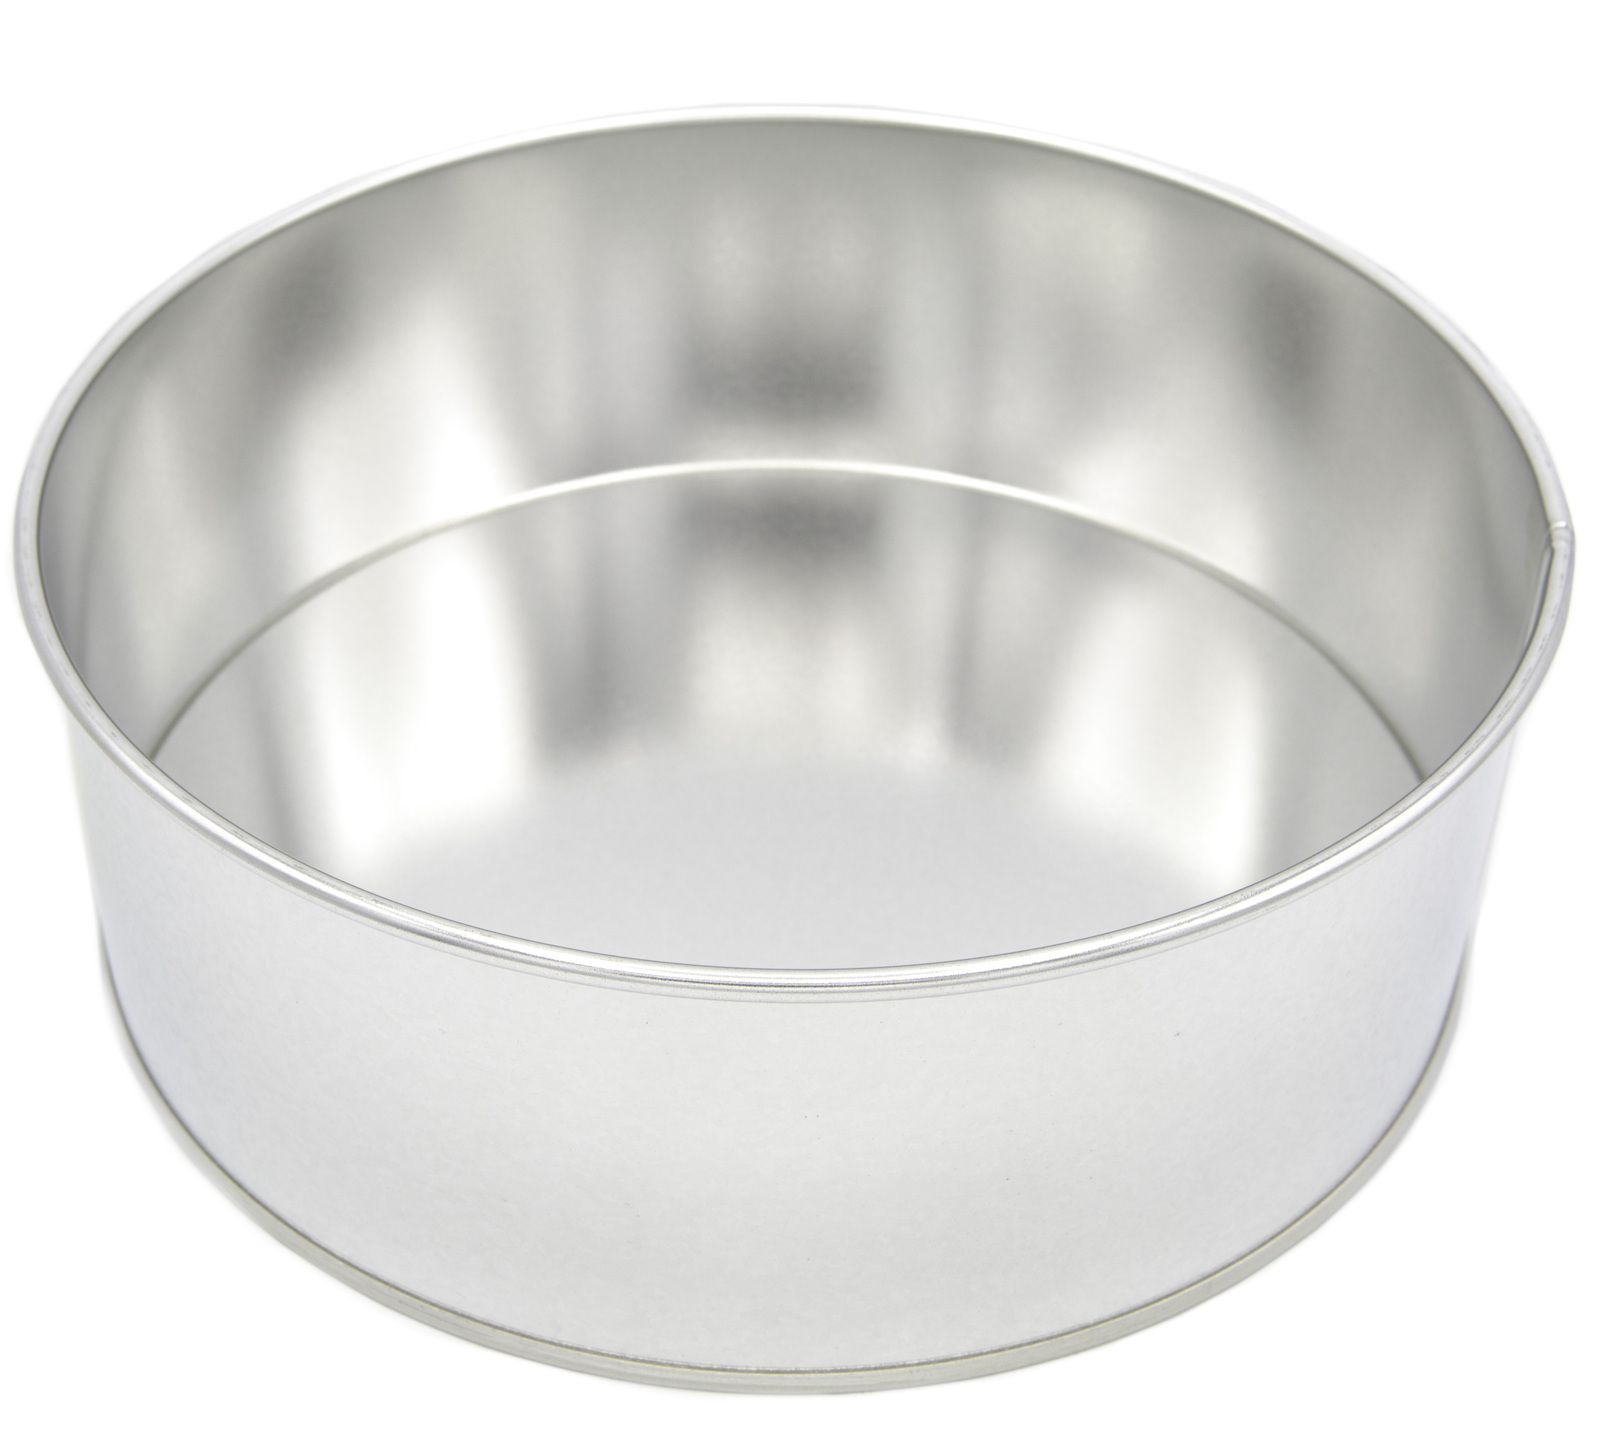 Baker's Cutlery Aluminium Baking Round Cake Mould, Size- 4 Inch (Height-4  Inch) - Baker's Cutlery